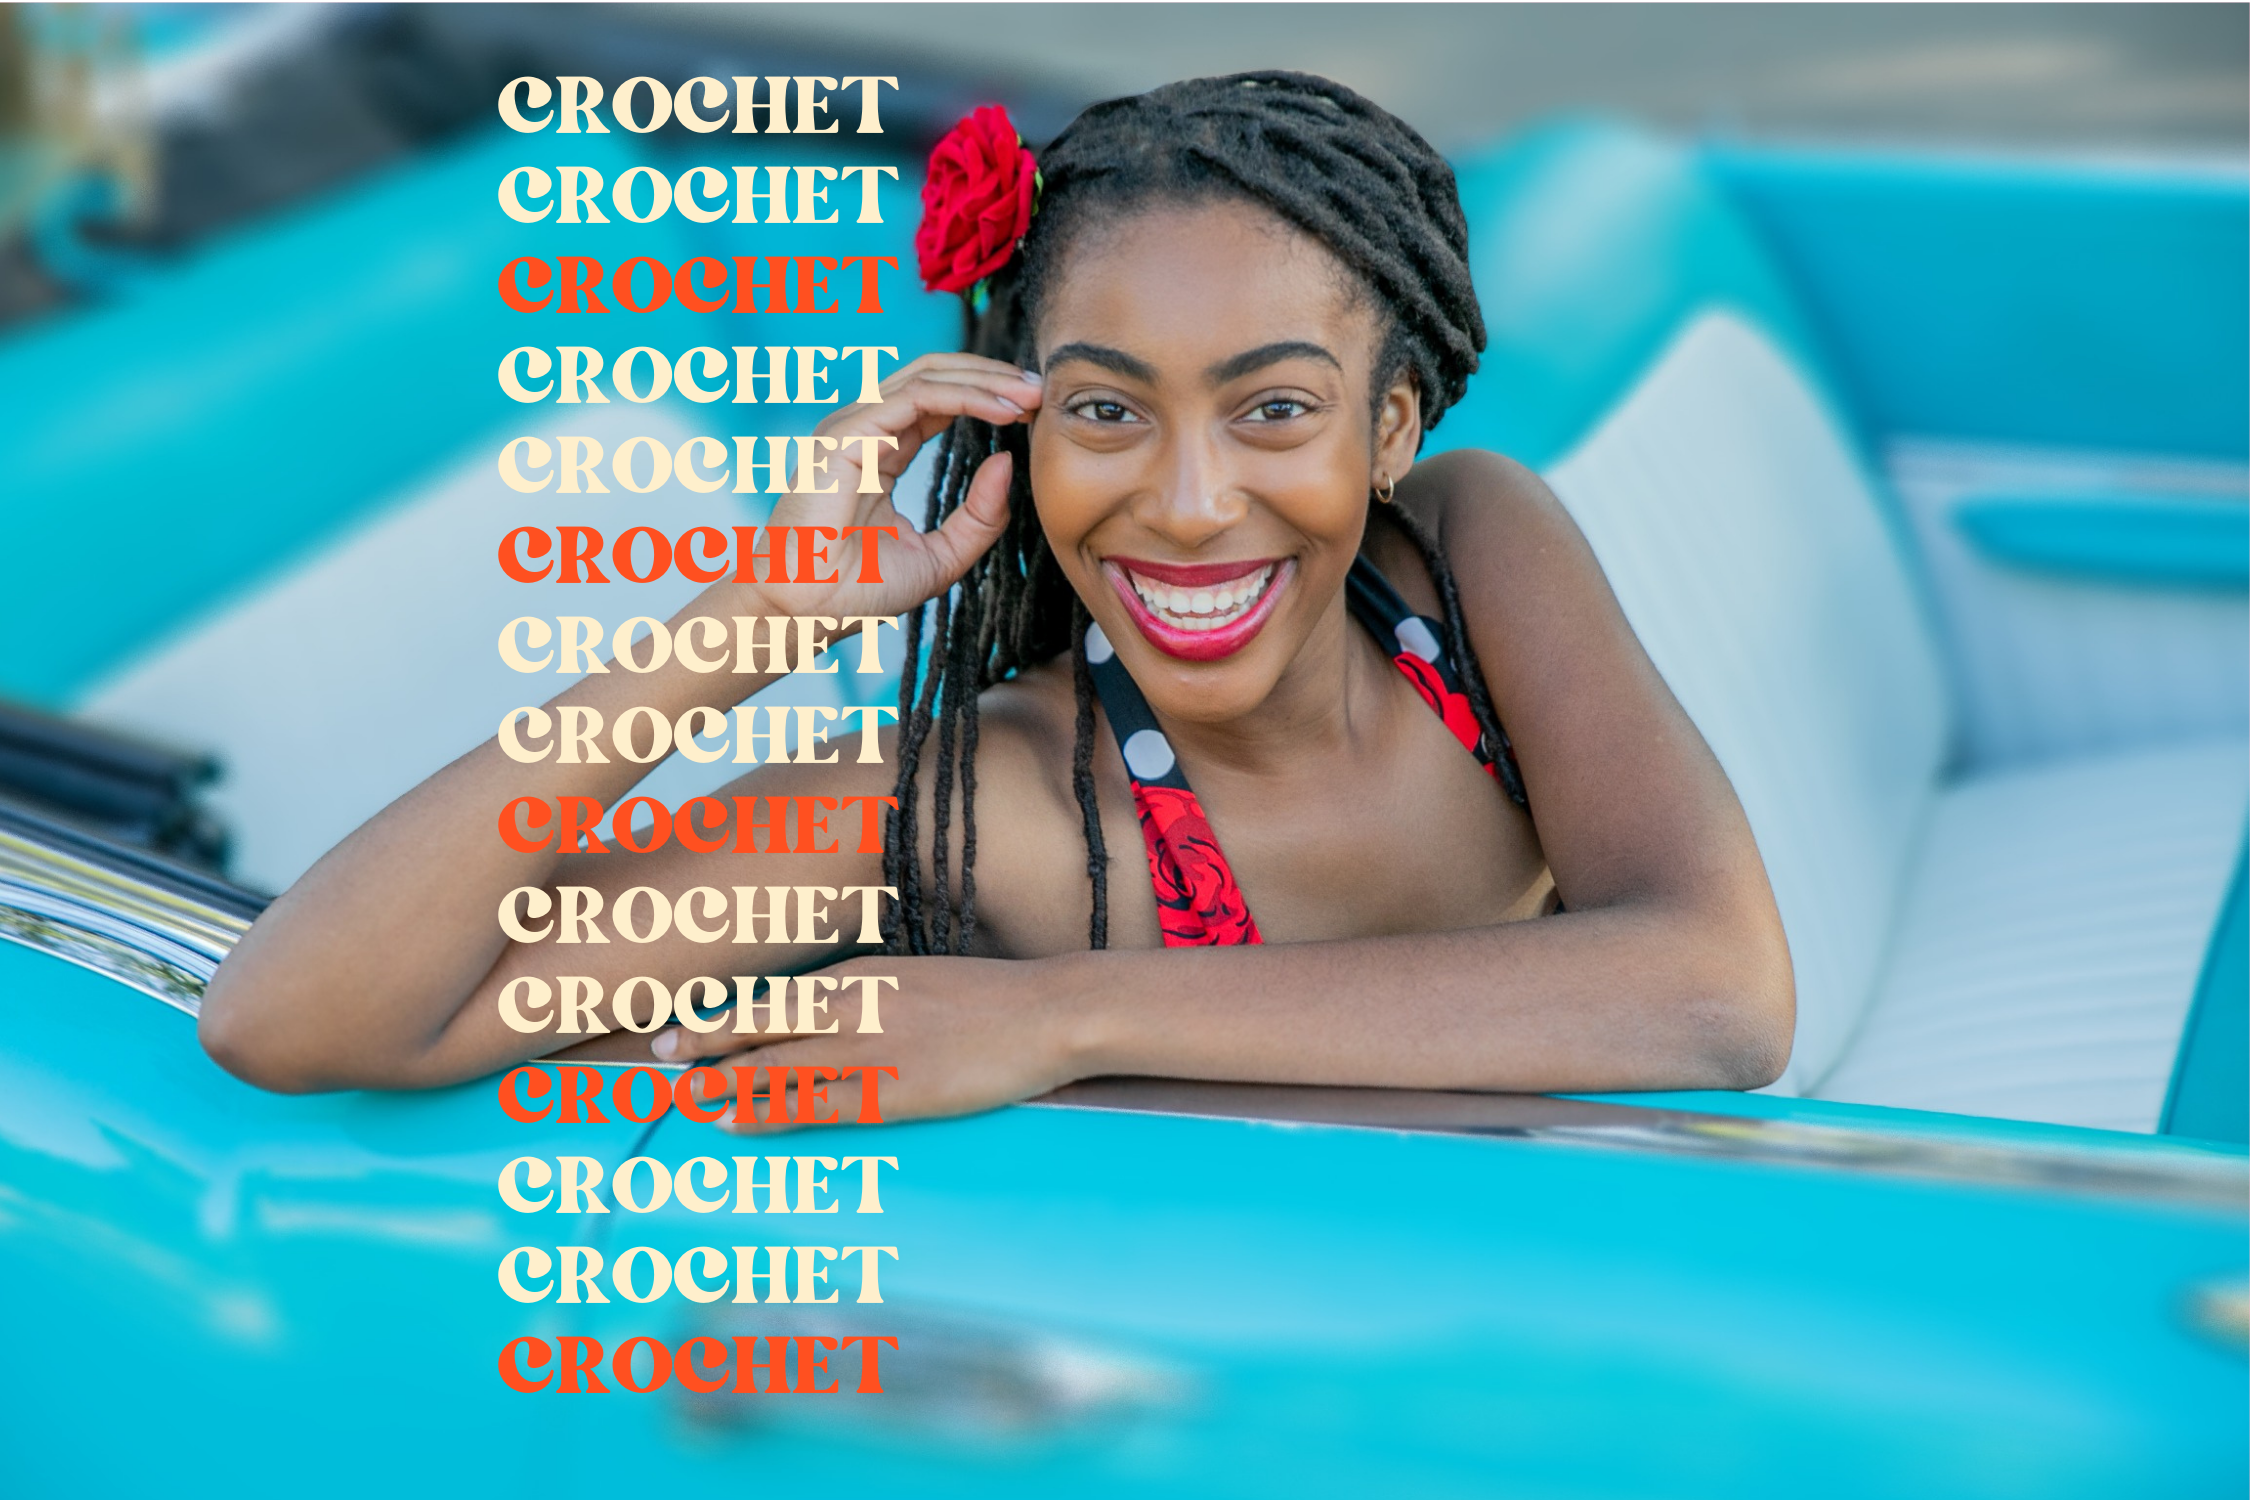 A woman sits in a light blue convertible, smiling. Her hair is done in faux locs and she wears a red rose in it. She wears a black halter neck with a print of red roses. On the left is text that reads "Crochet, Crochet, Crochet" all the way to the bottom of the image.   